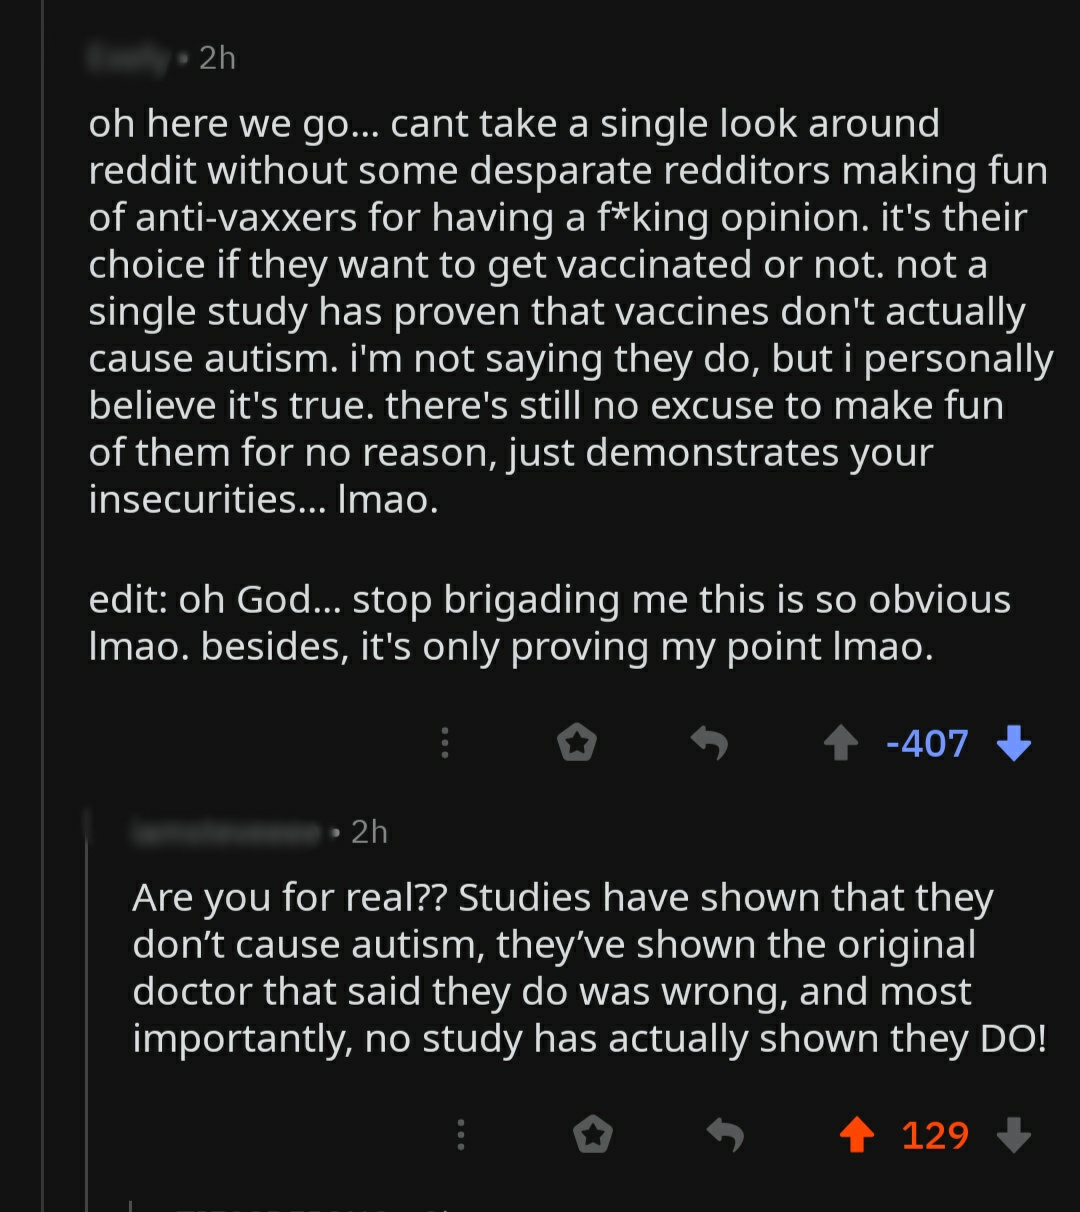 cant take a single look around reddit without some desparate redditors making fun of antivaxxers for having a fking opinion. it's their choice if they want to get vaccinated or not. not a single study has proven that vacci